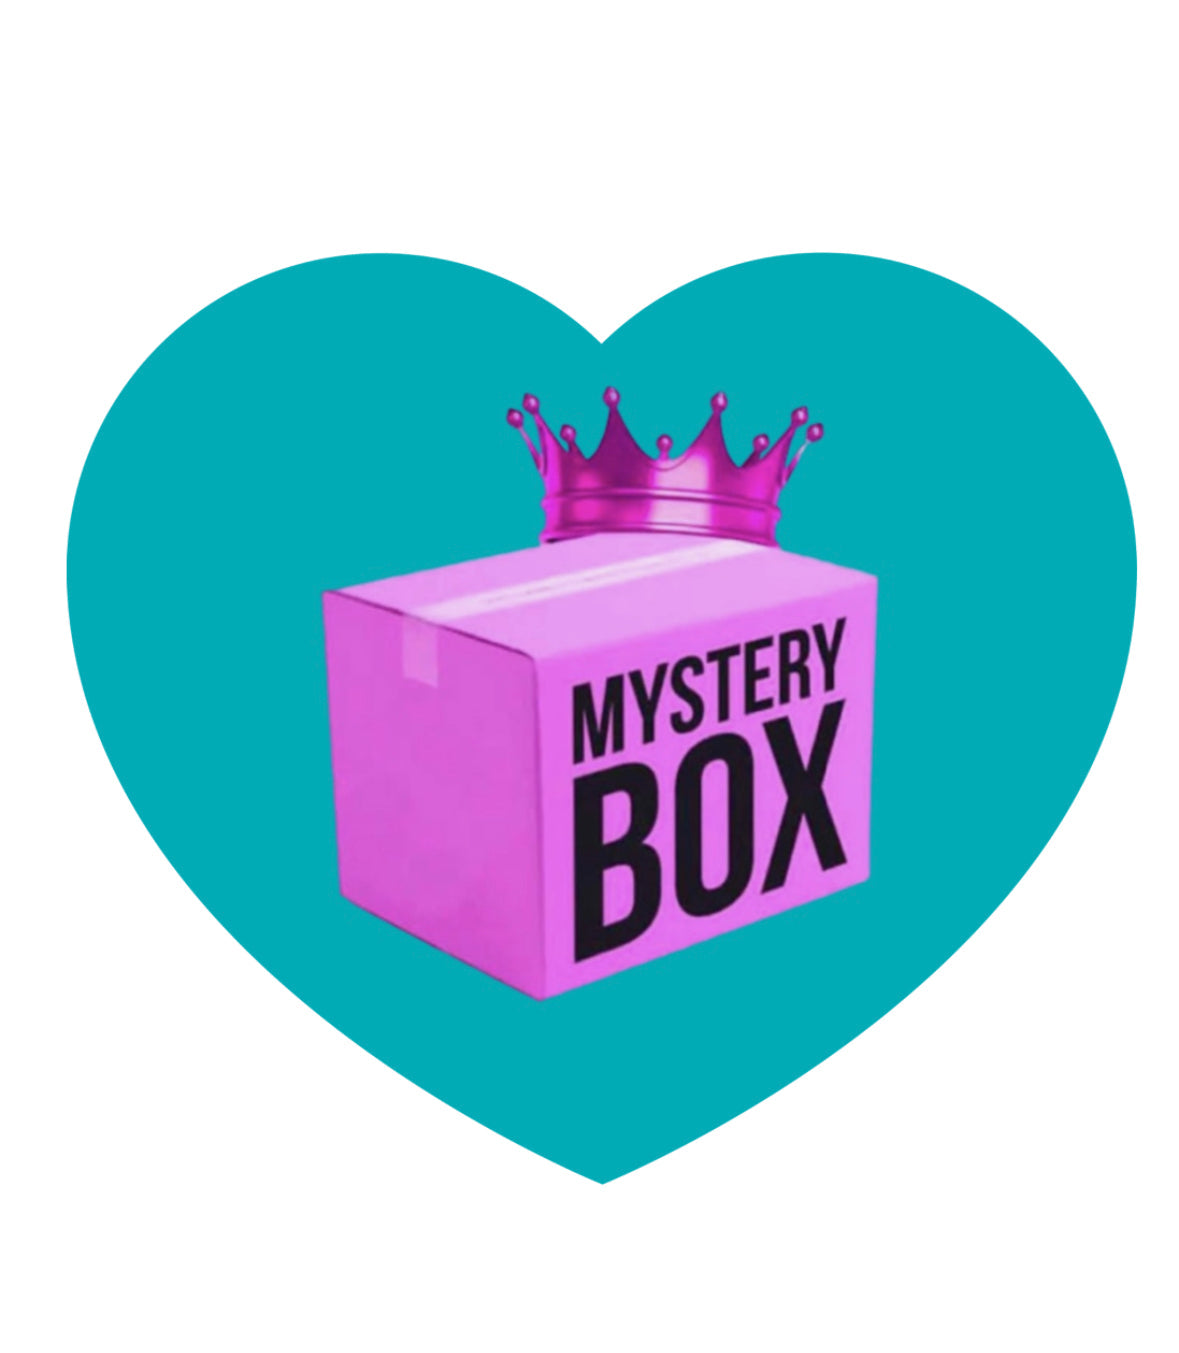 October Mystery Box - PLEASE DO NOT ADD ANYTHING ELSE TO YOUR CART WITH THIS ORDER OR I WILL HAVE TO CANCEL YOUR ORDER - Thank you so much 🩷